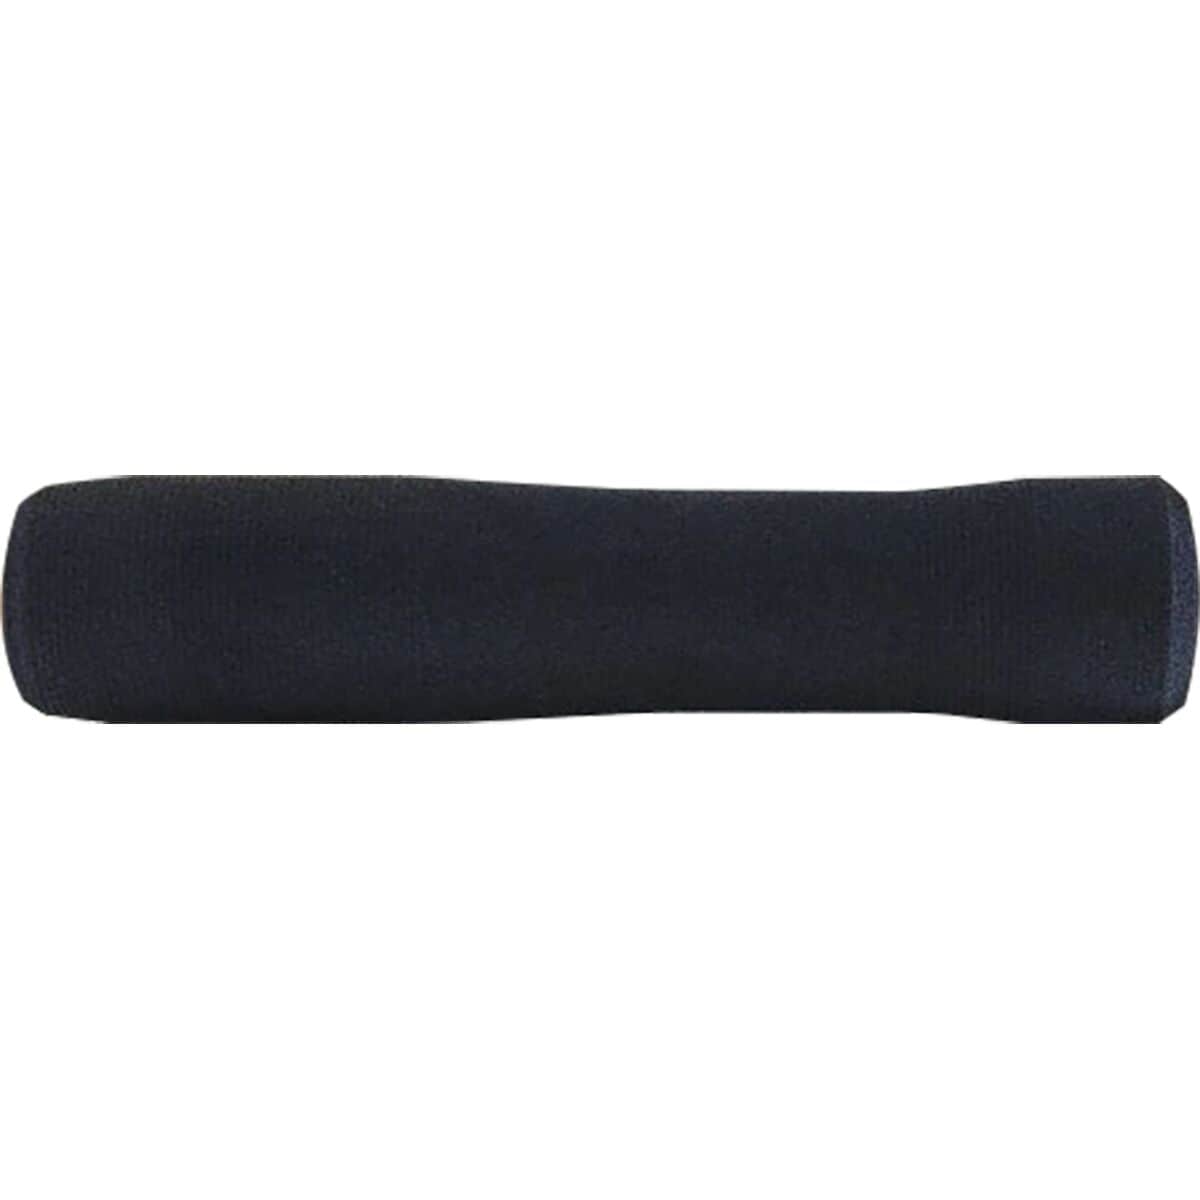  ESI Grips Racers Edge MTB Grip (Black), one Size (GVP03) :  Bike Grips And Accessories : Sports & Outdoors